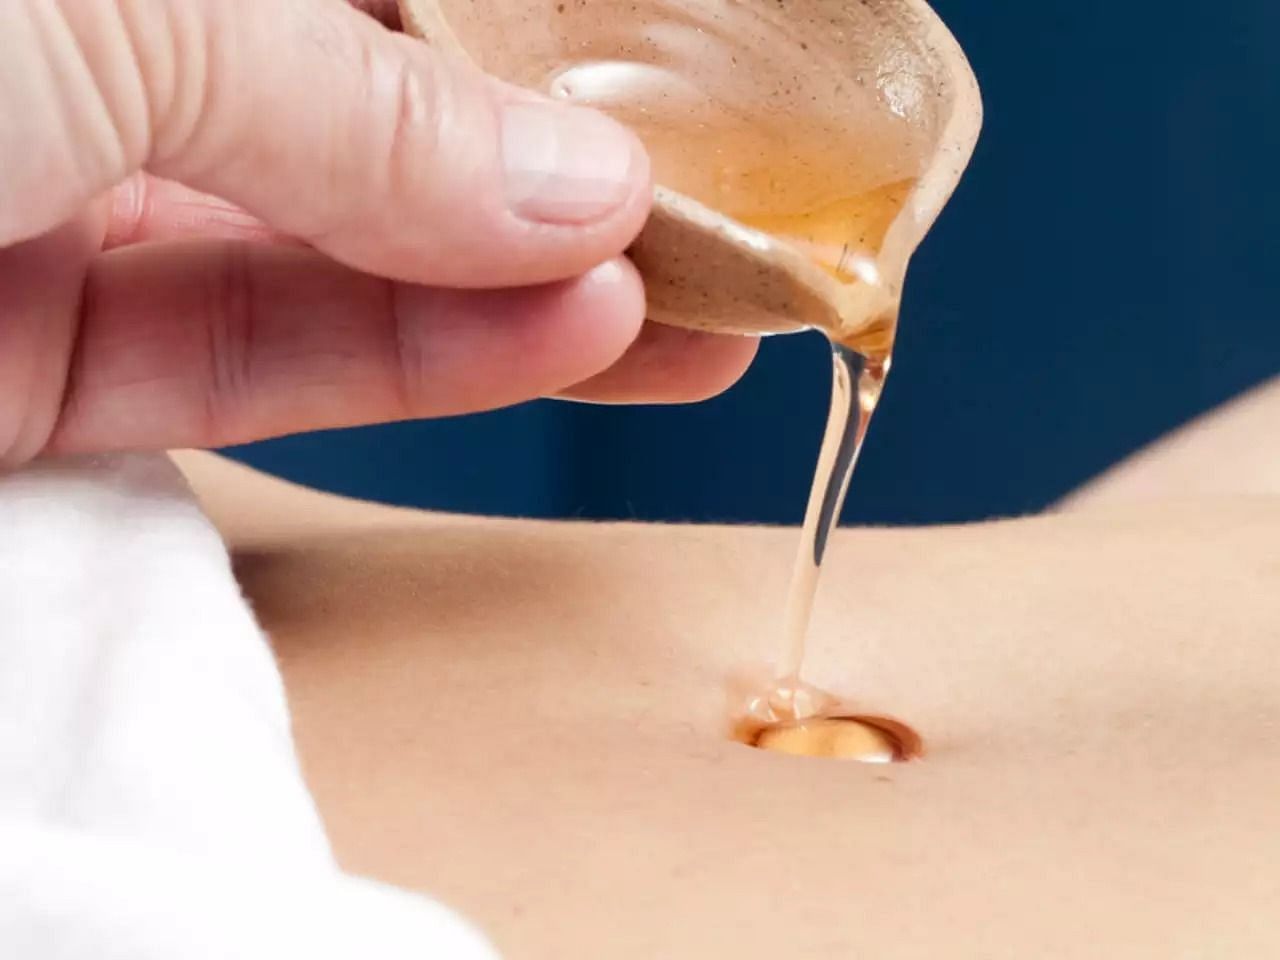 Castor oil on belly button (Image via Getty Images)